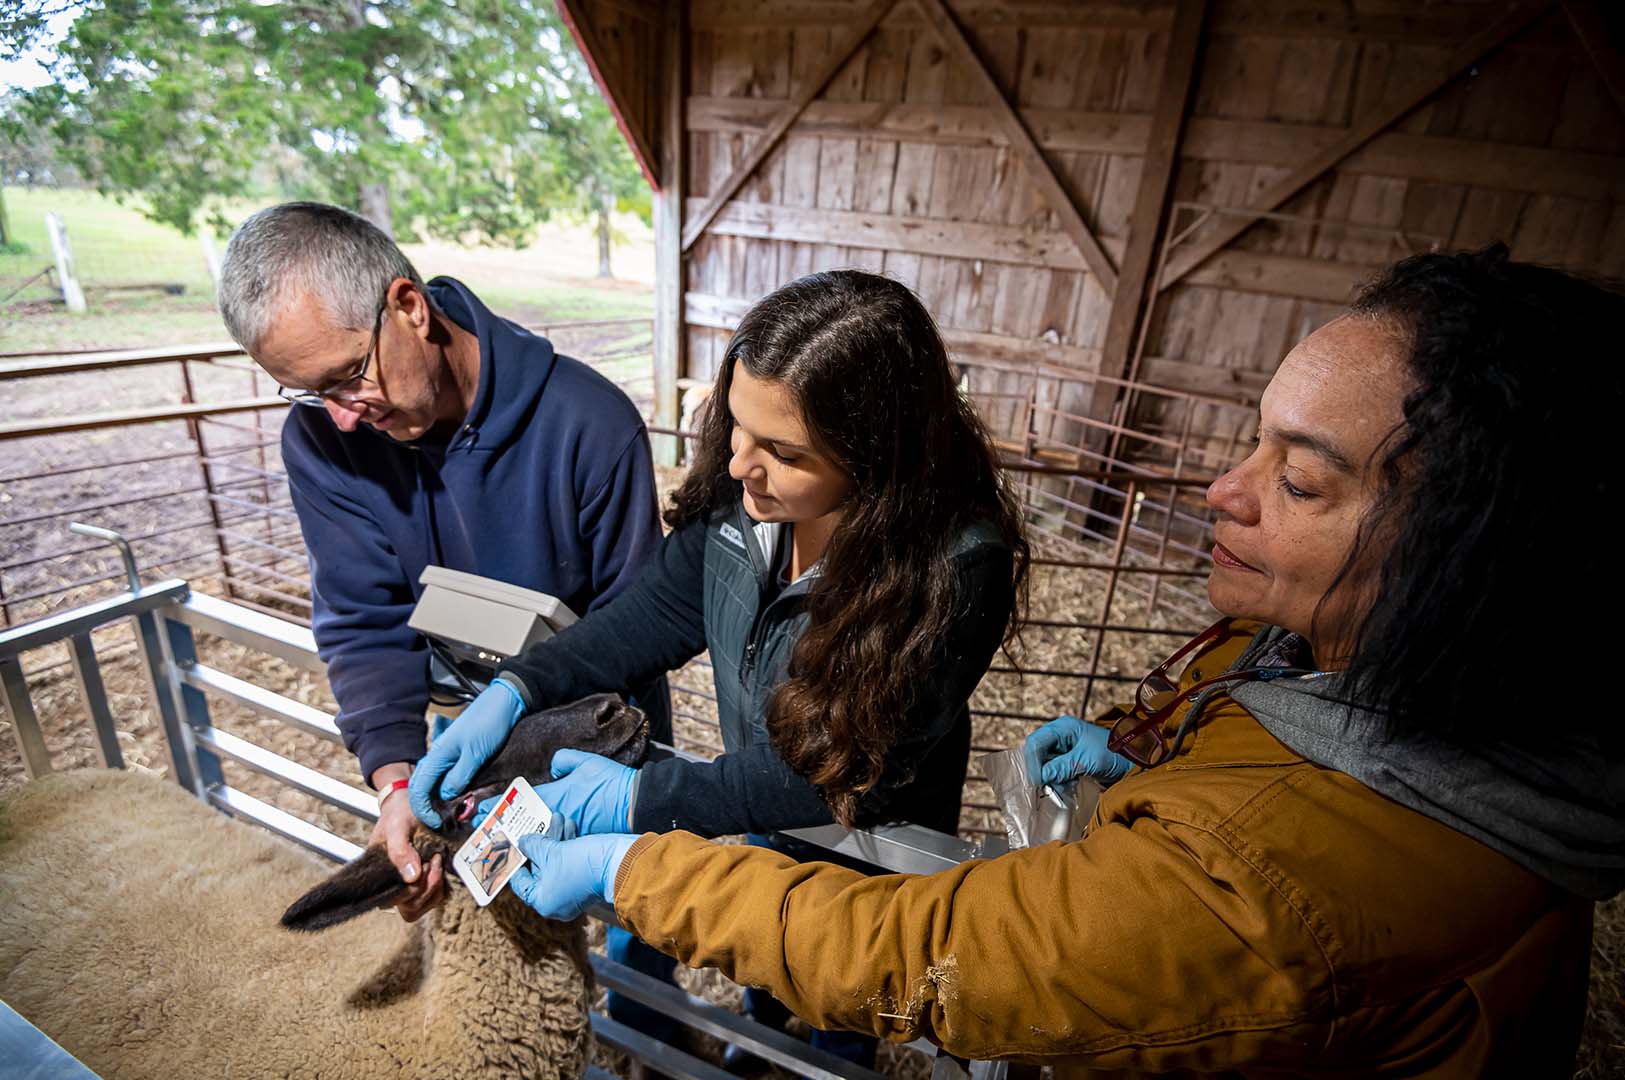 Opposite: Brad Gilmore, Lindsey Dearborn, and Leyla Rios examine a sheep at Gilmore’s Mississippi farm. (Photo by David Ammon)